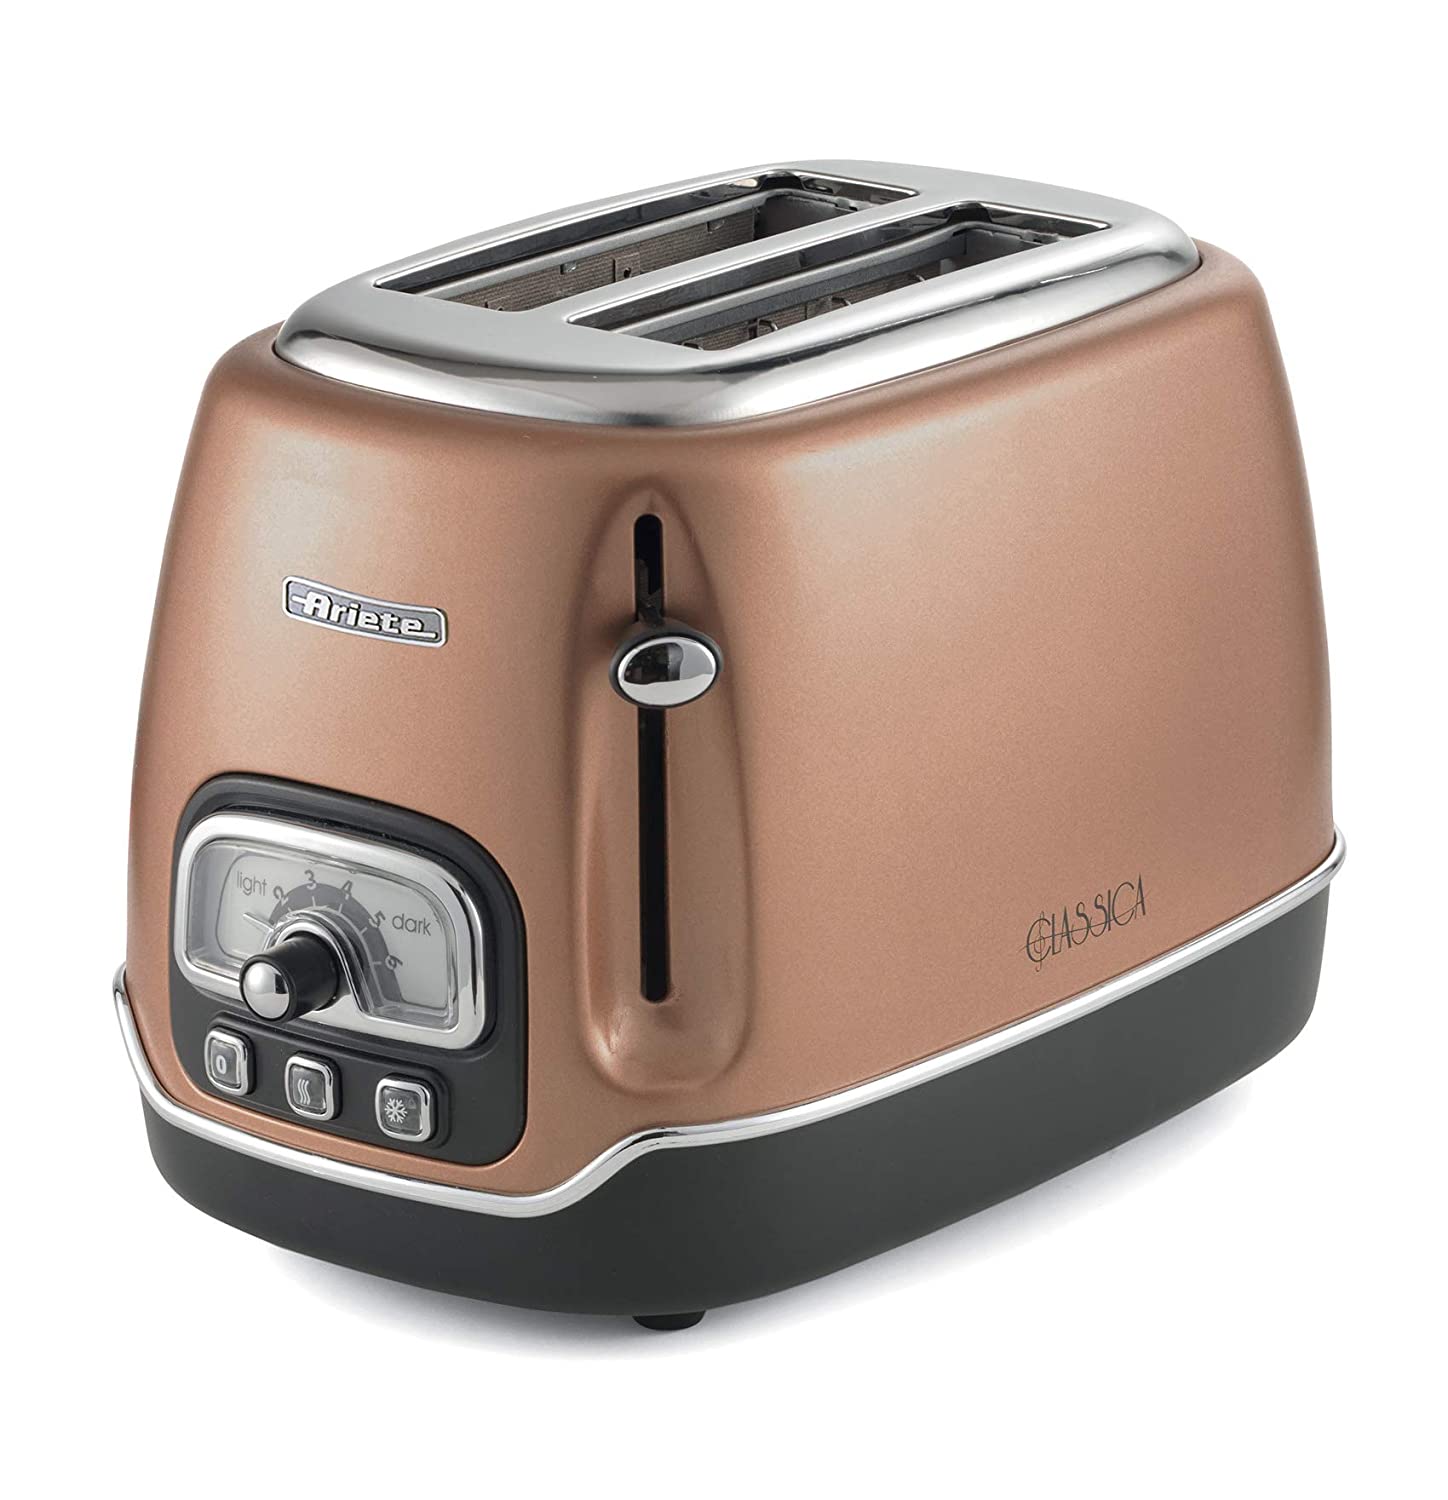 Ariete Tostapane Classica 158/38, Electric Toaster 2 Slices, Without Tongs, 815 W, 3 Functions, 6 Browning Levels, Copper - Mahajan Electronics Online